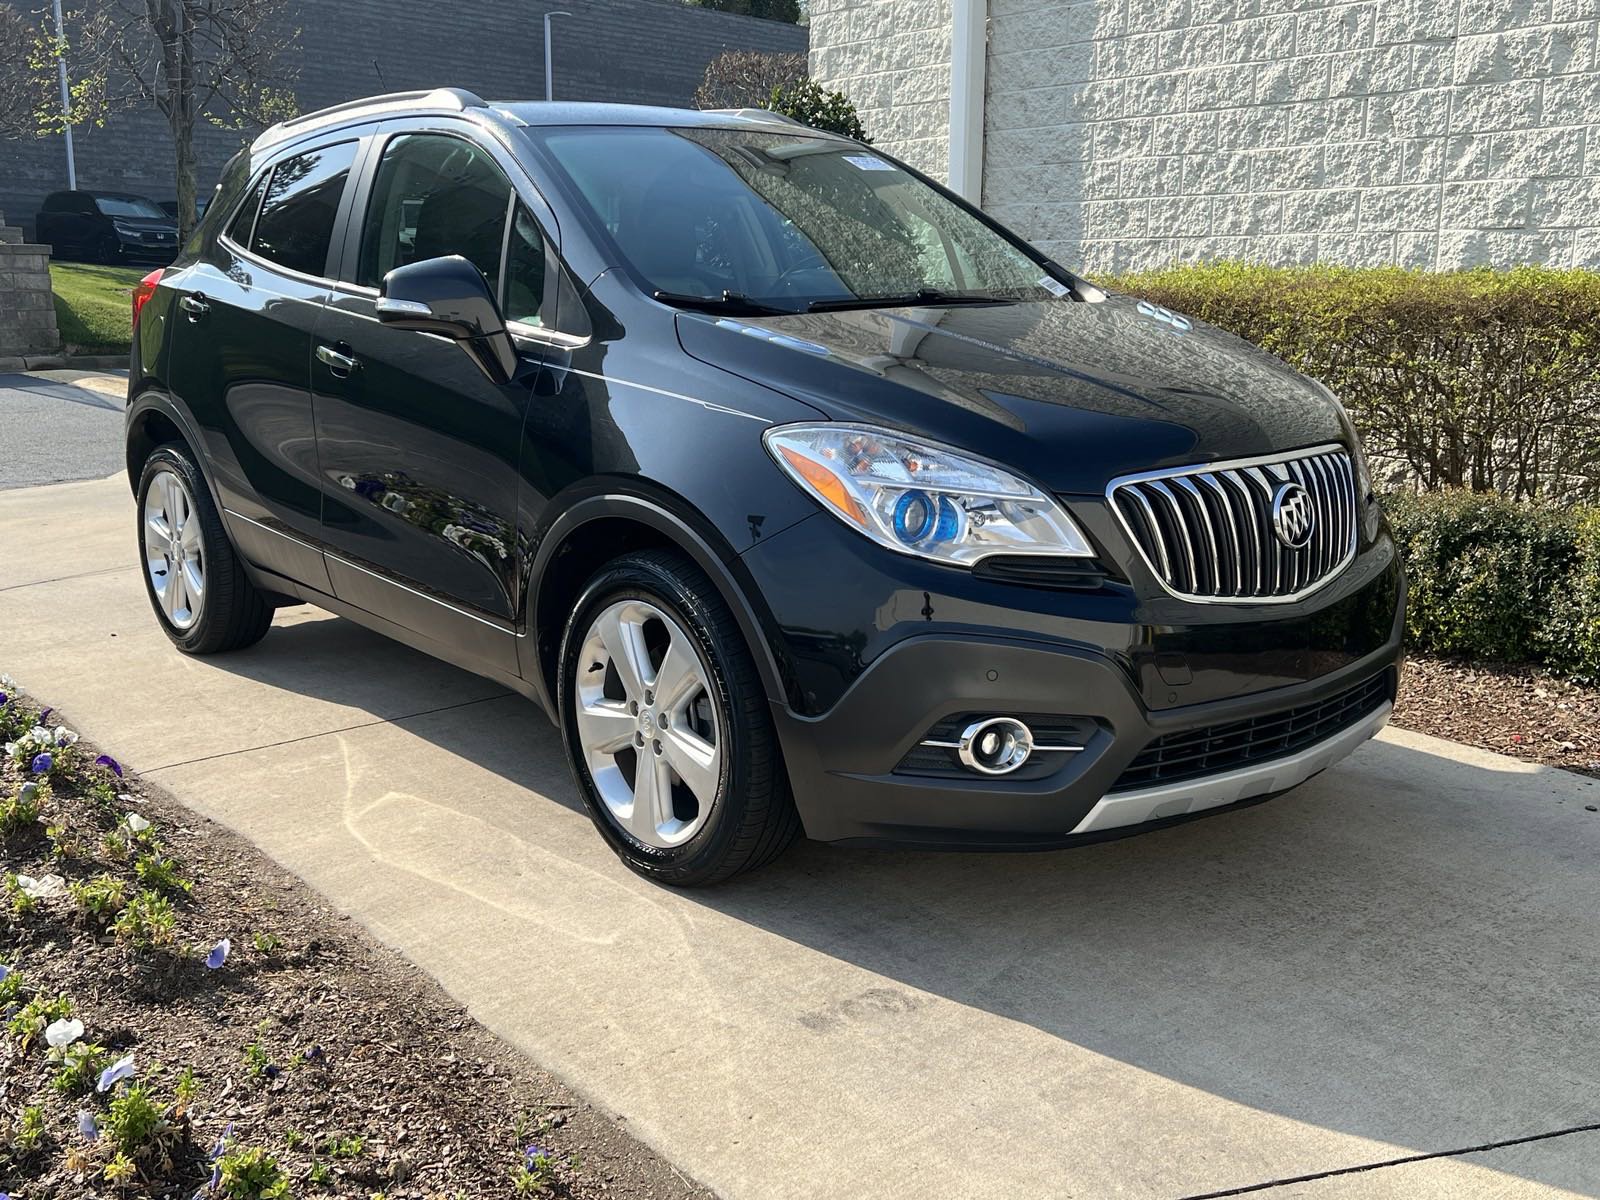 Pre-Owned 2015 Buick Encore Premium SUV in Cary #Q100427A | Hendrick Dodge  Cary